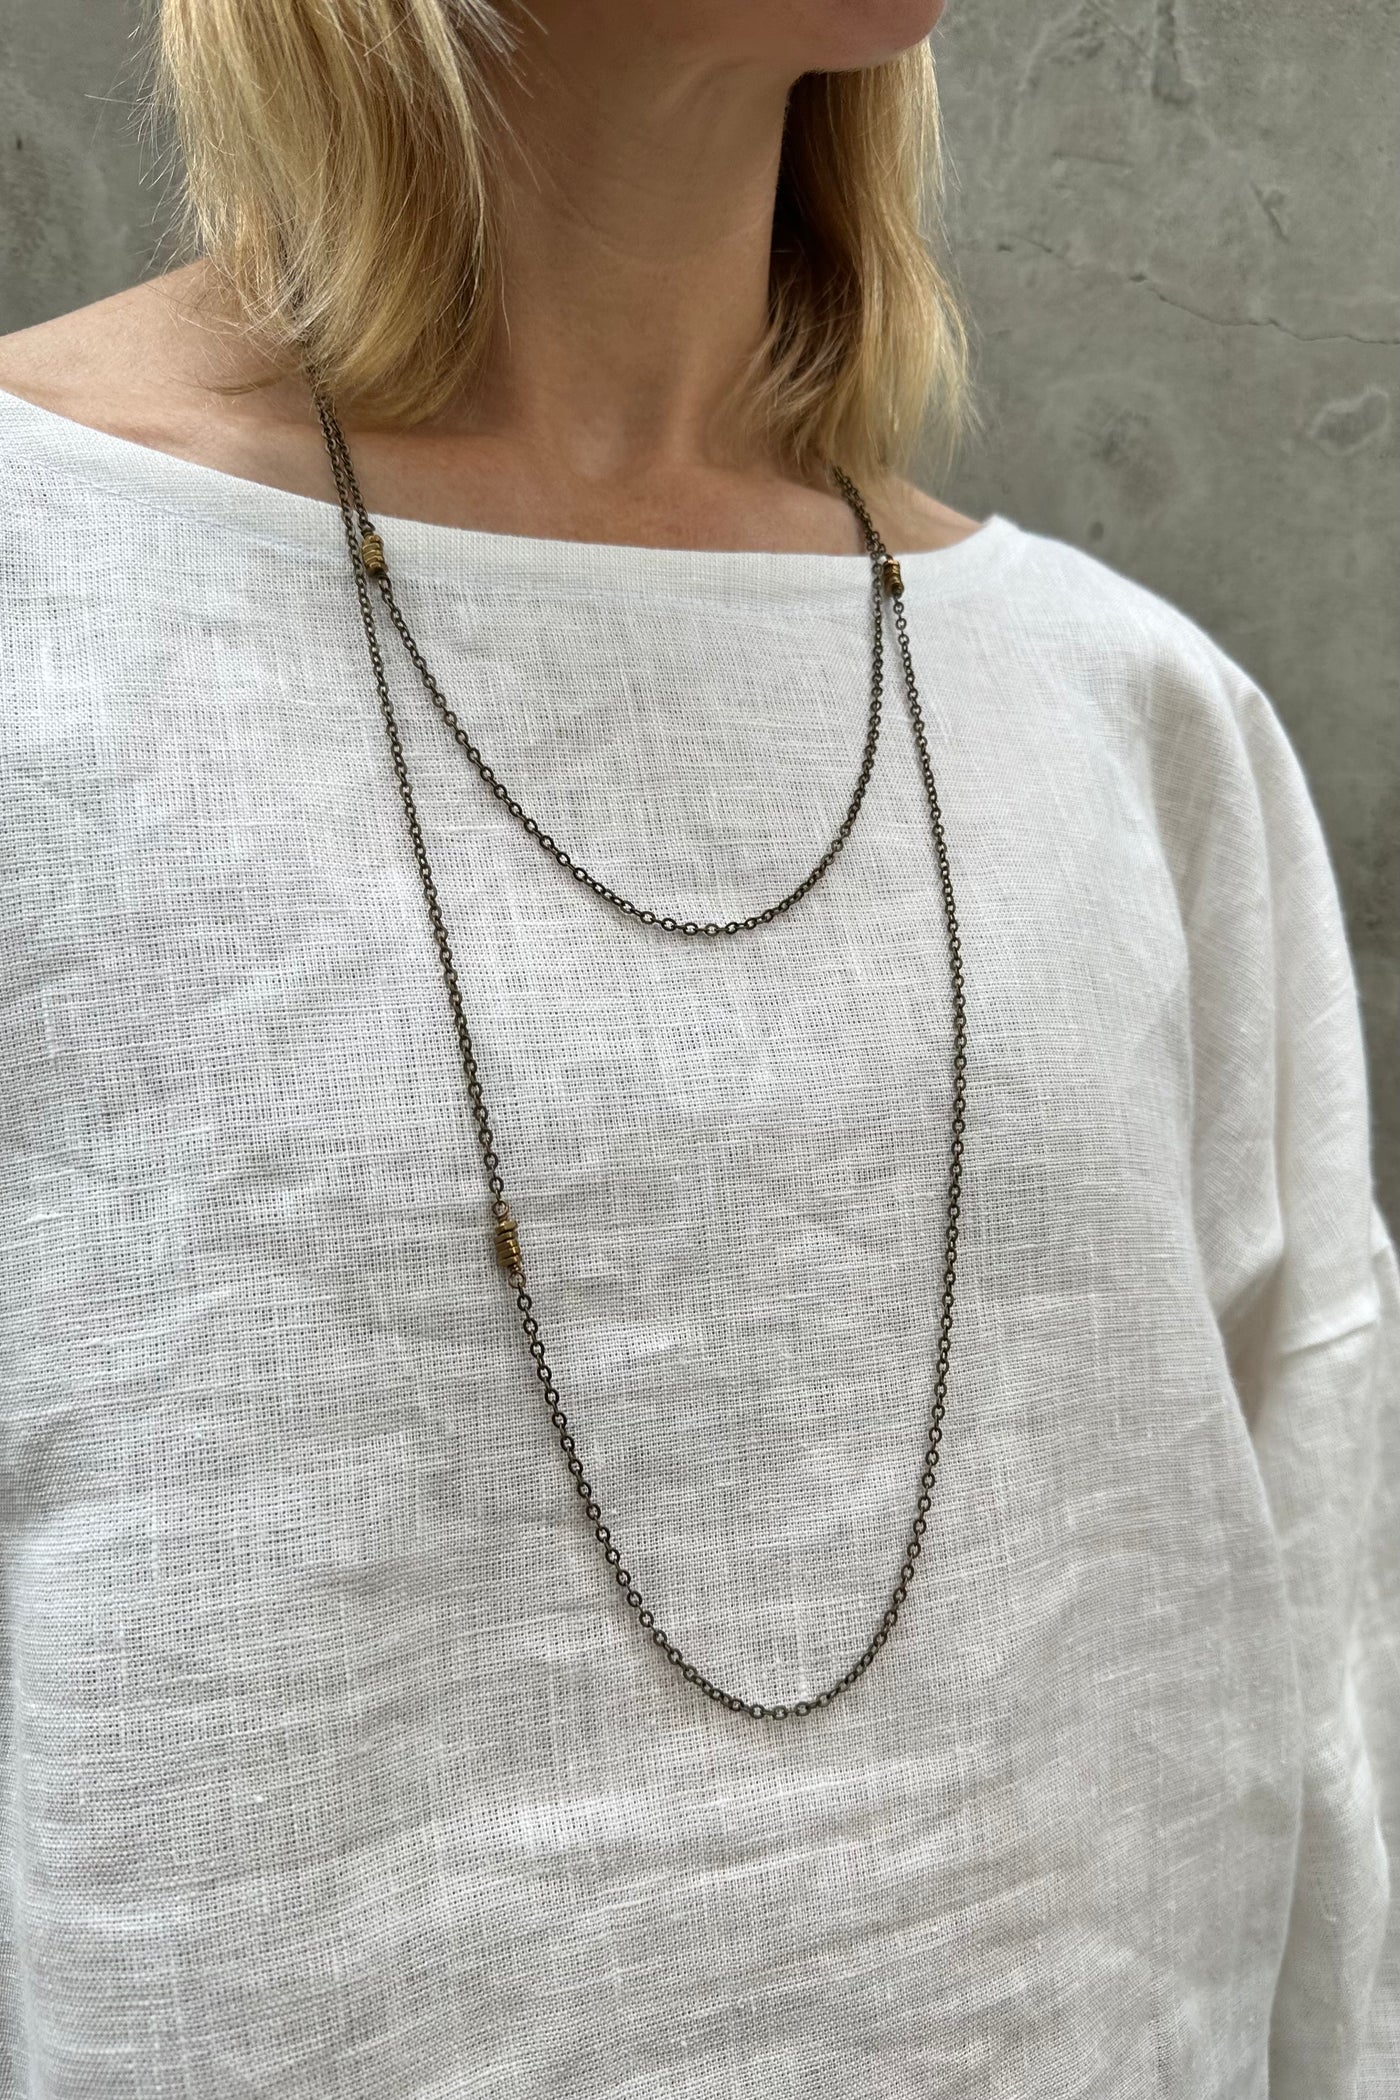 Wrap Necklace - Delicate Brass